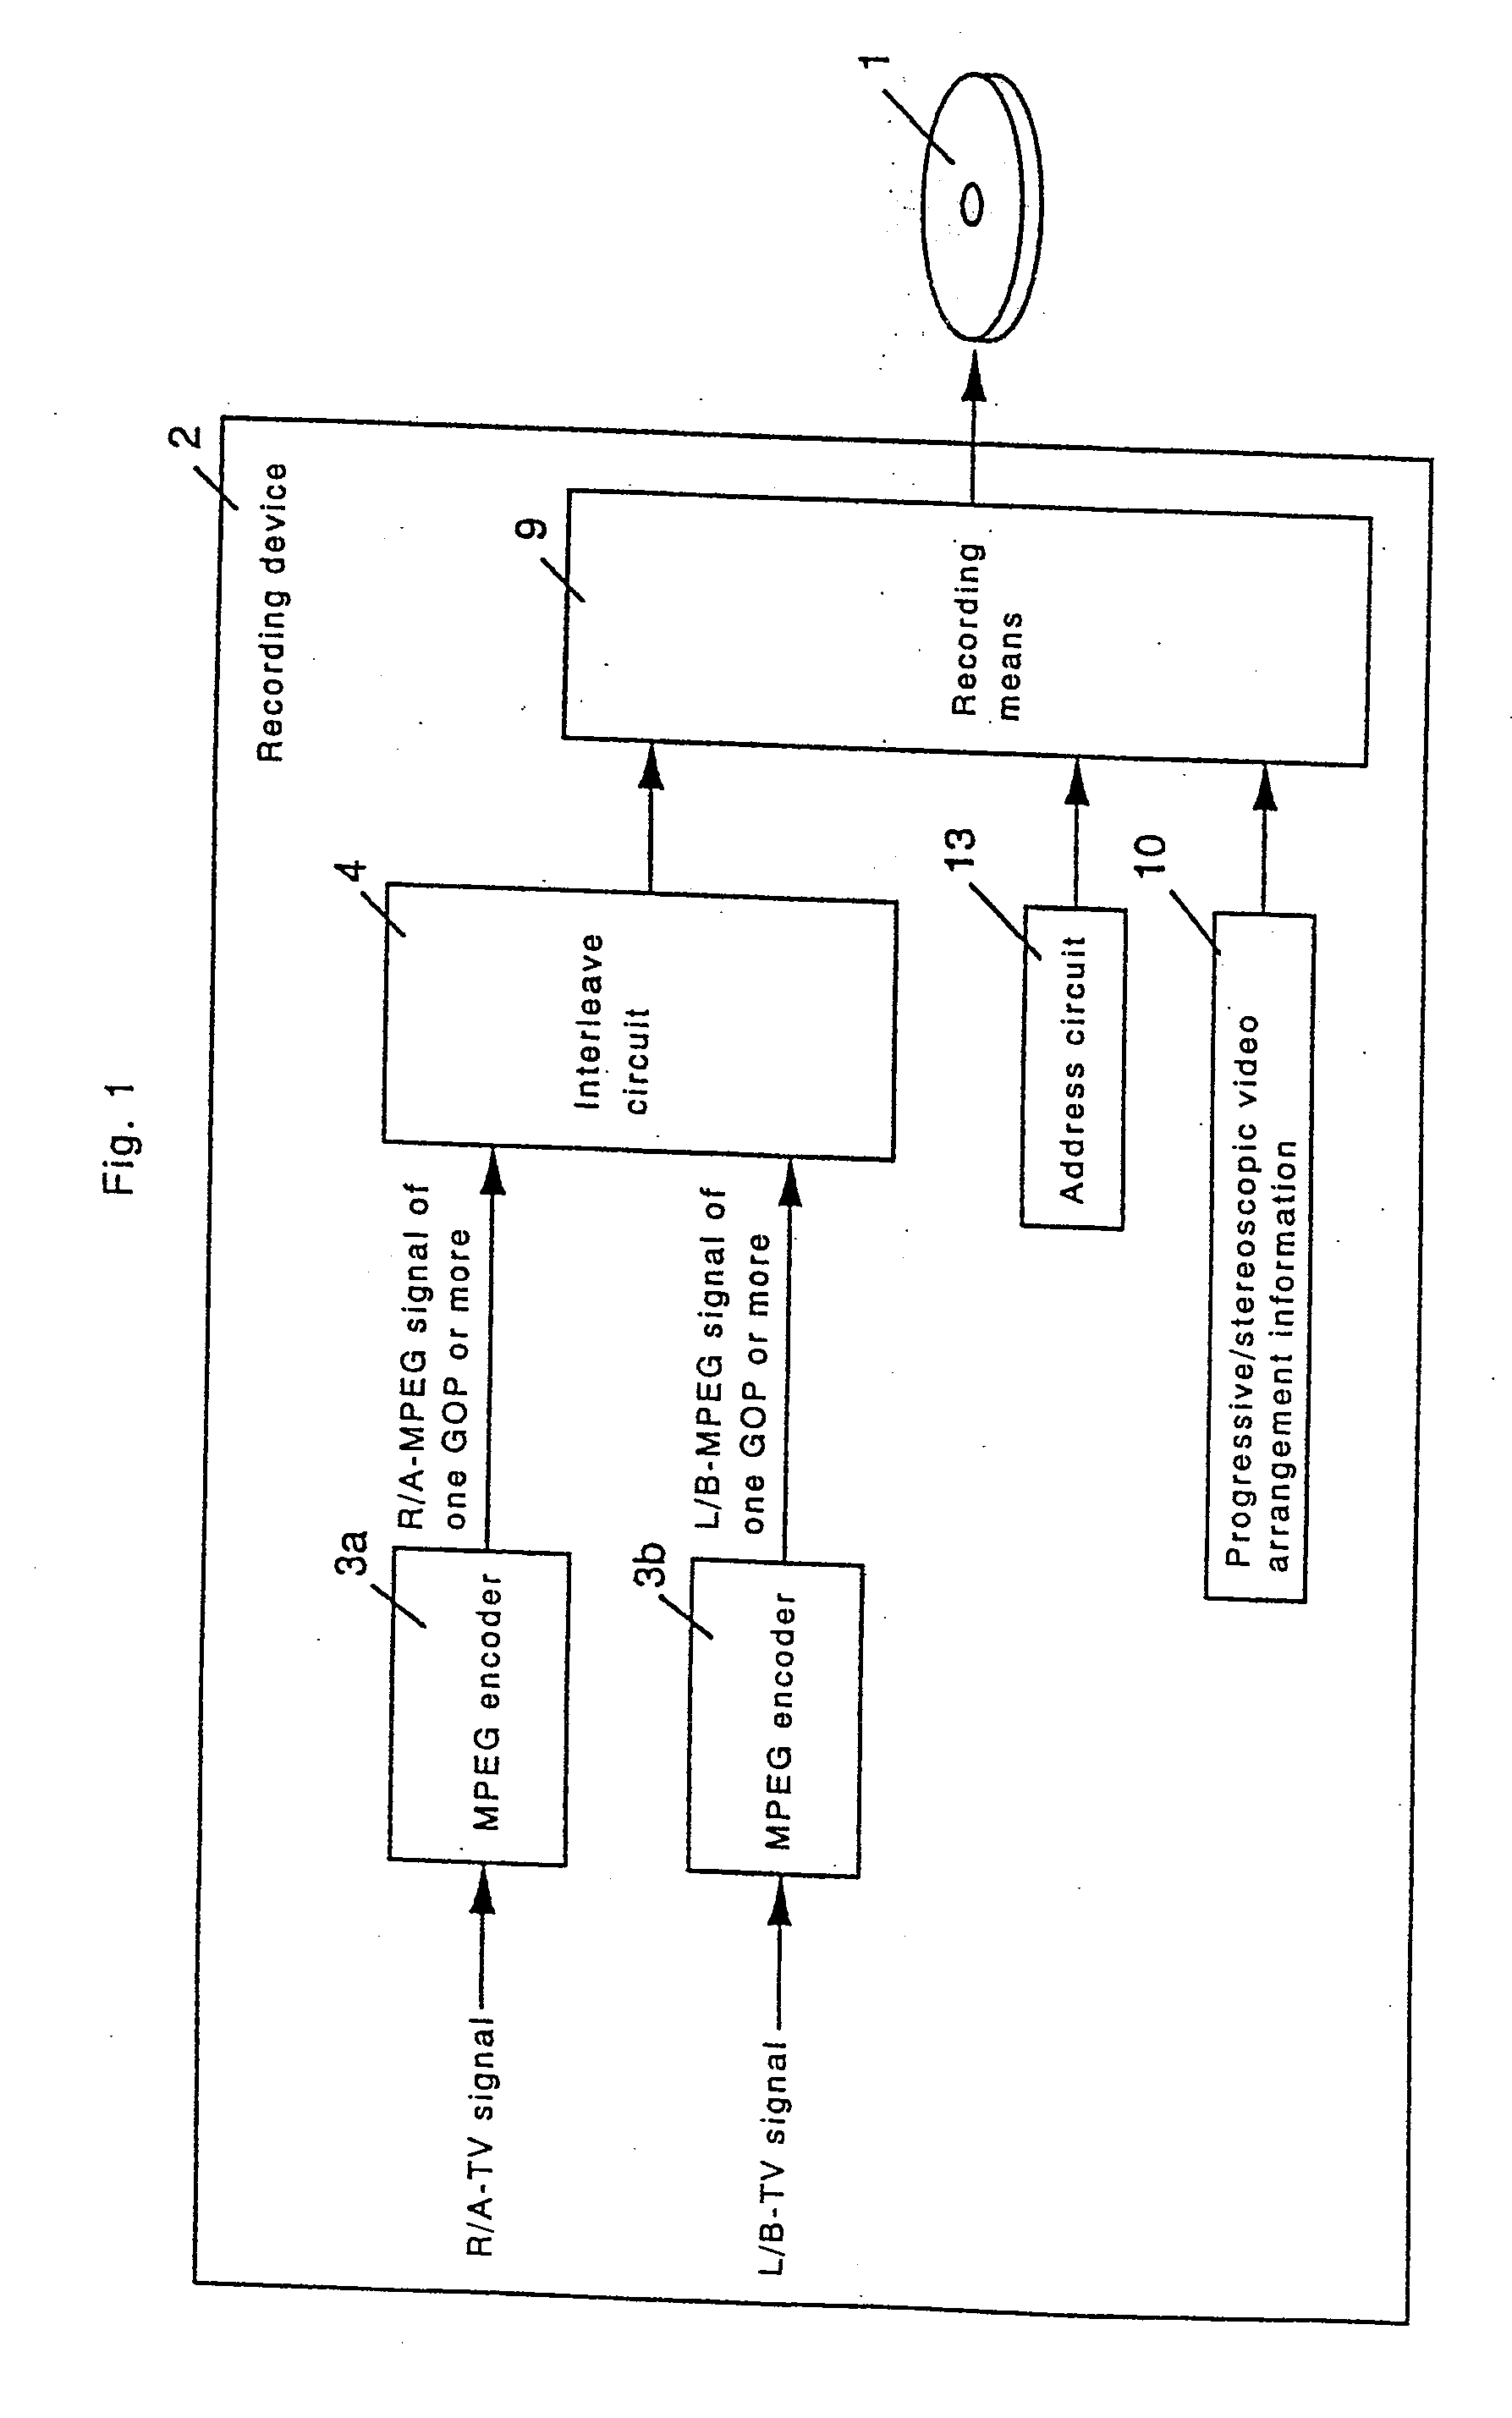 High-resolution optical disk for recording stereoscopic video, optical disk reproducing device, and optical disk recording device